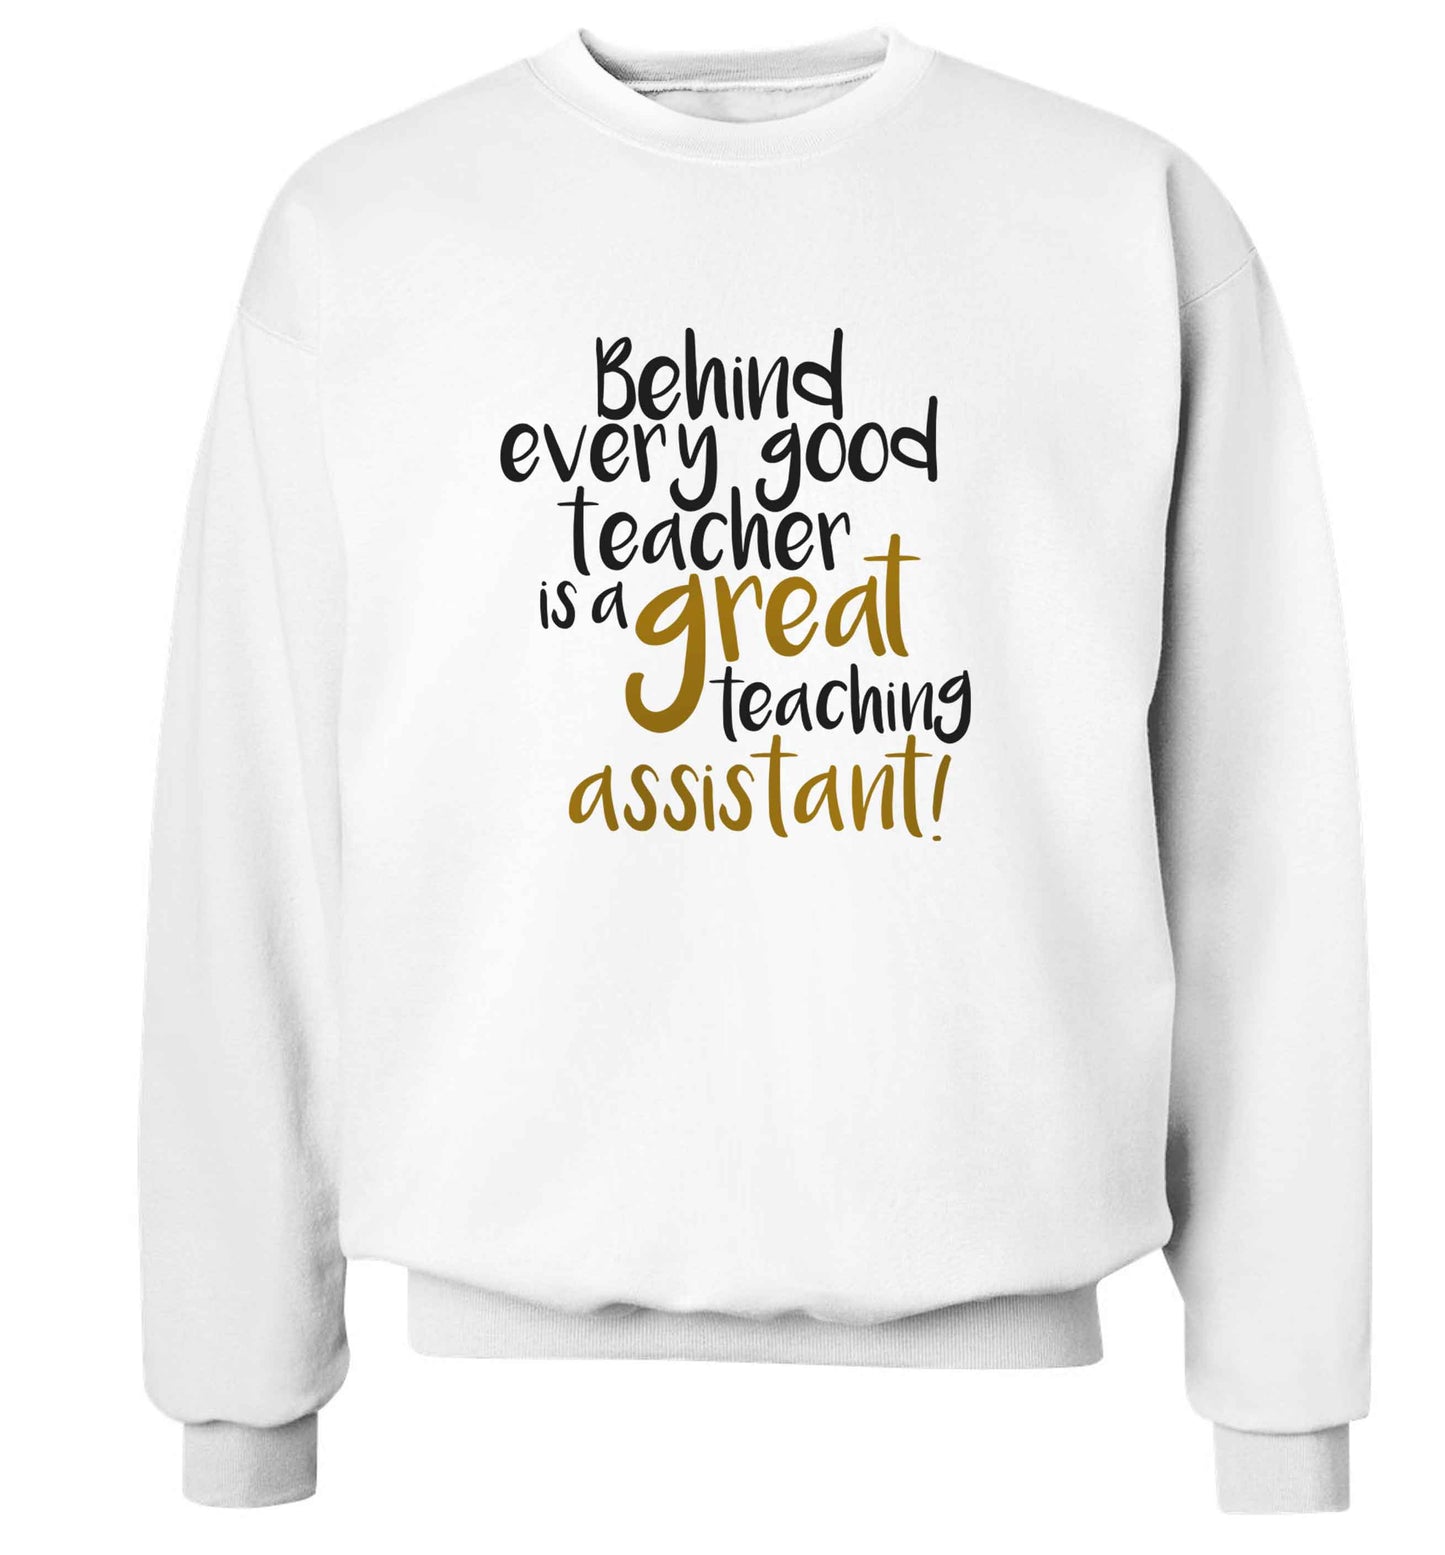 Behind every good teacher is a great teaching assistant adult's unisex white sweater 2XL